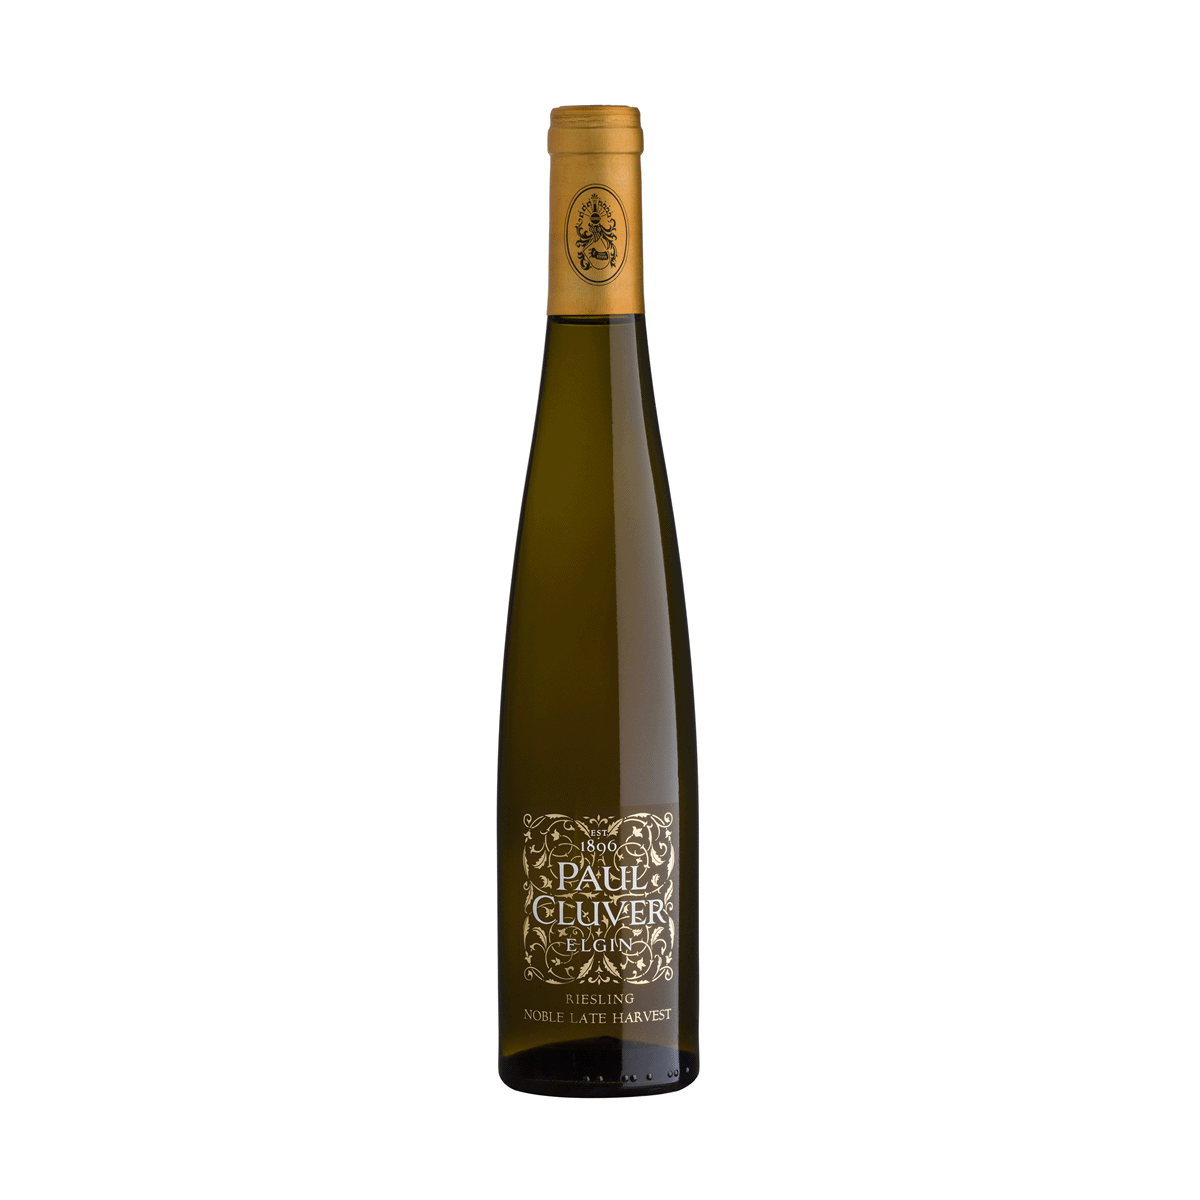 Paul Cluver Riesling Noble Late Harvest 2021